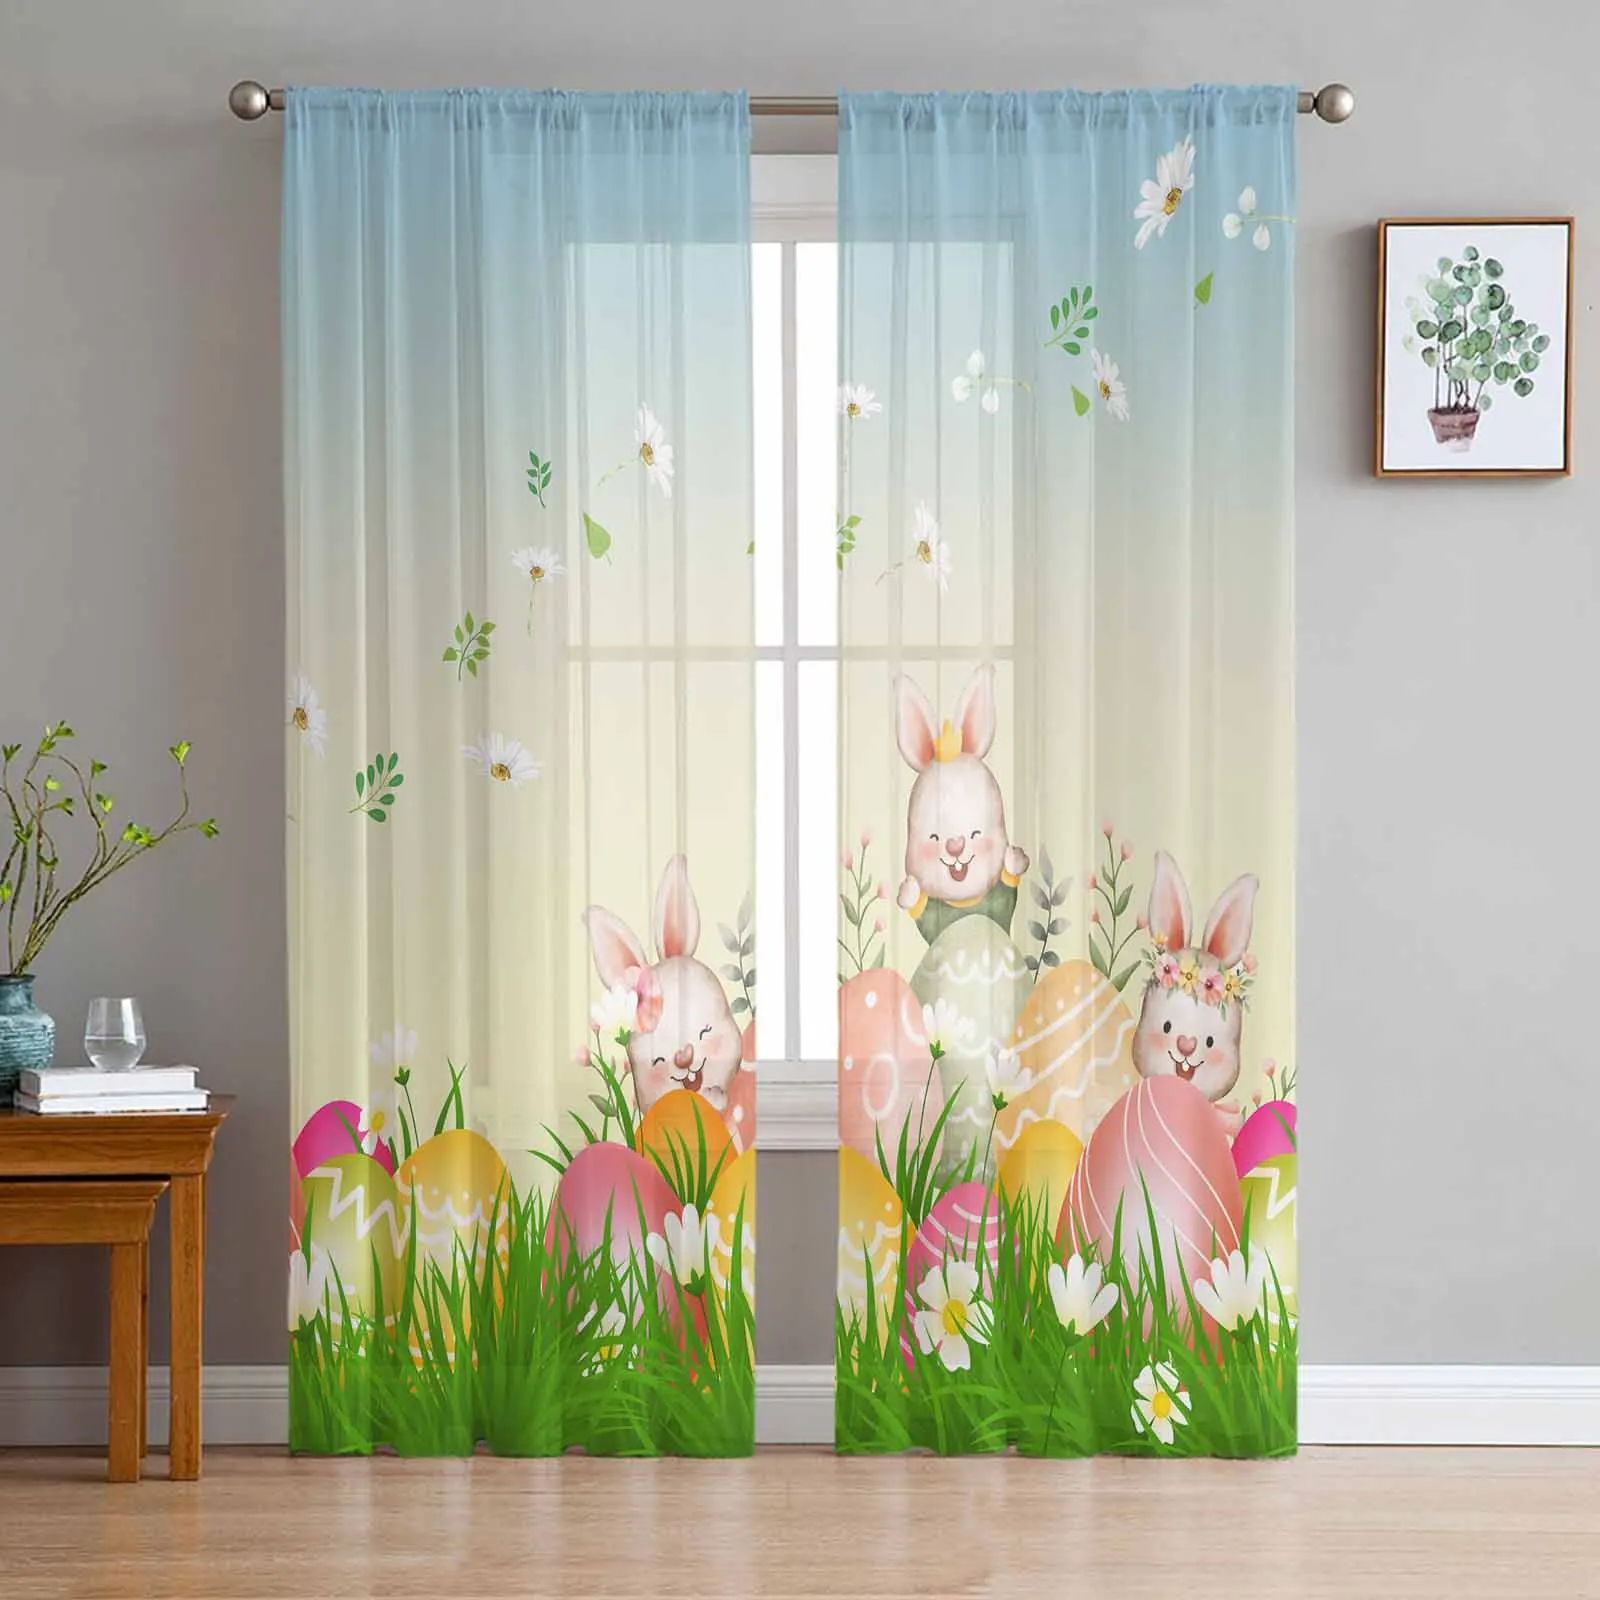 

Flower Rabbit Egg Grass Cartoon Easter Tulle Voile Curtains for Bedroom Living Room Window Curtain Sheer Curtains Organza Drapes